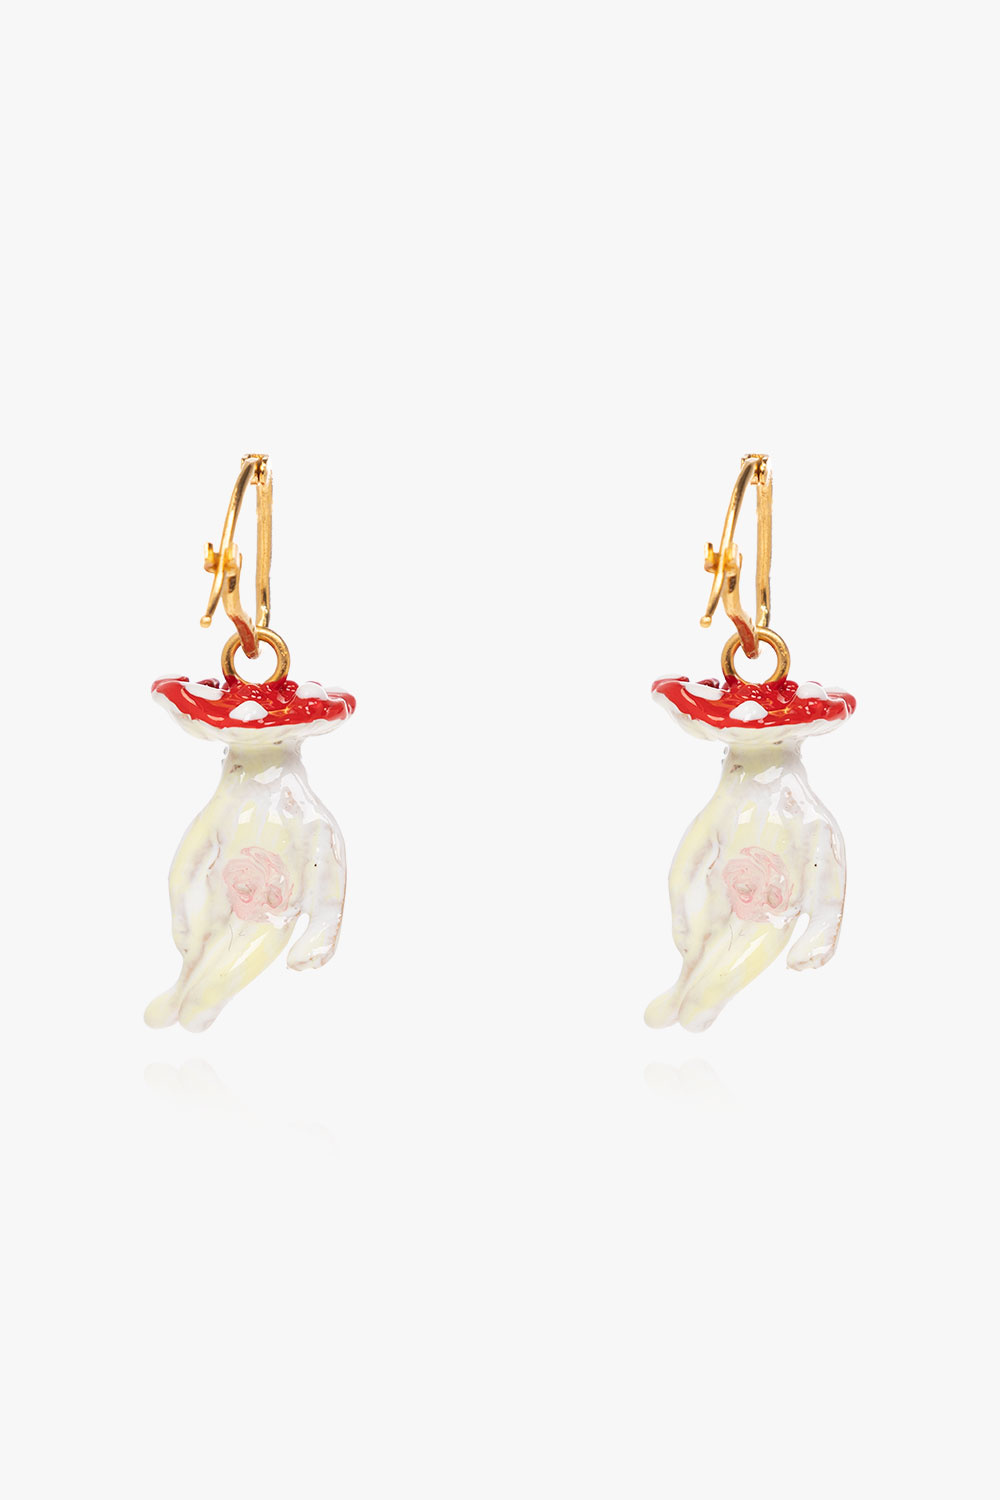 Marni Earrings with floral motif